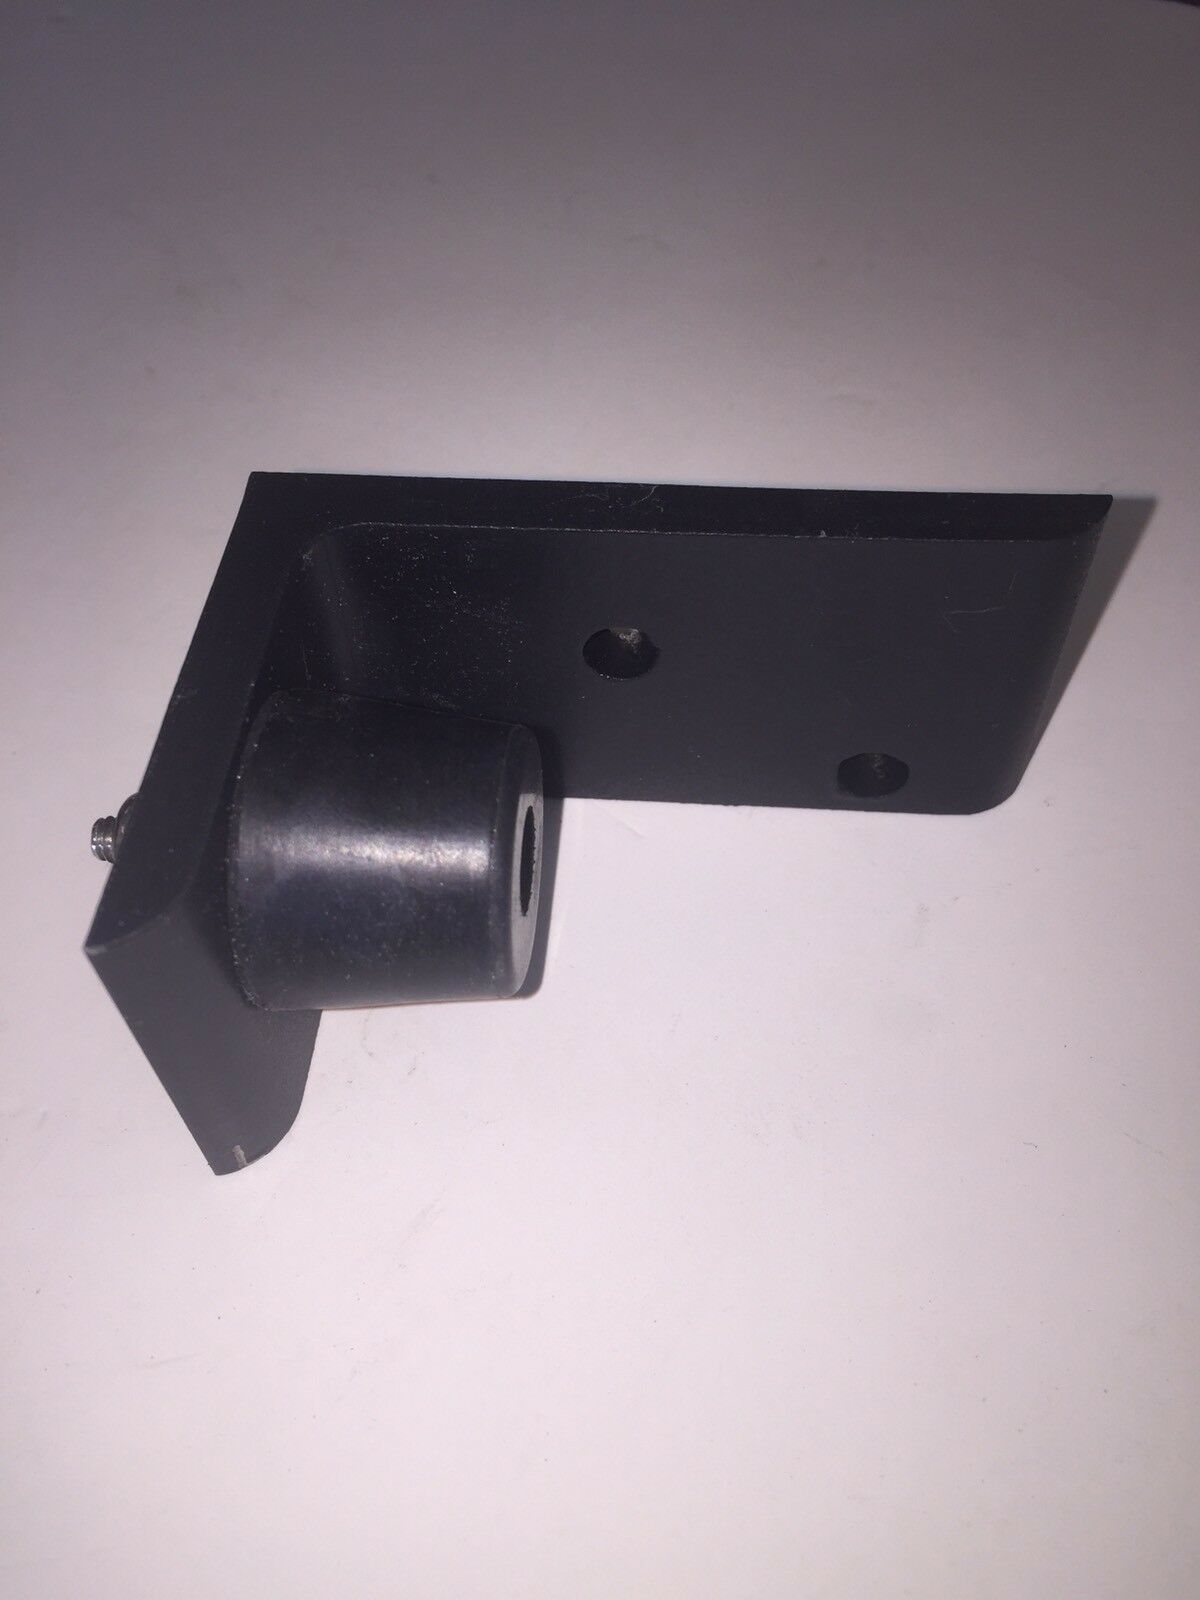 MILITARY X-DOOR WINDOW STOP ASSEMBLY RIGHT SIDE HUMVEE M998 RUBBER STOP